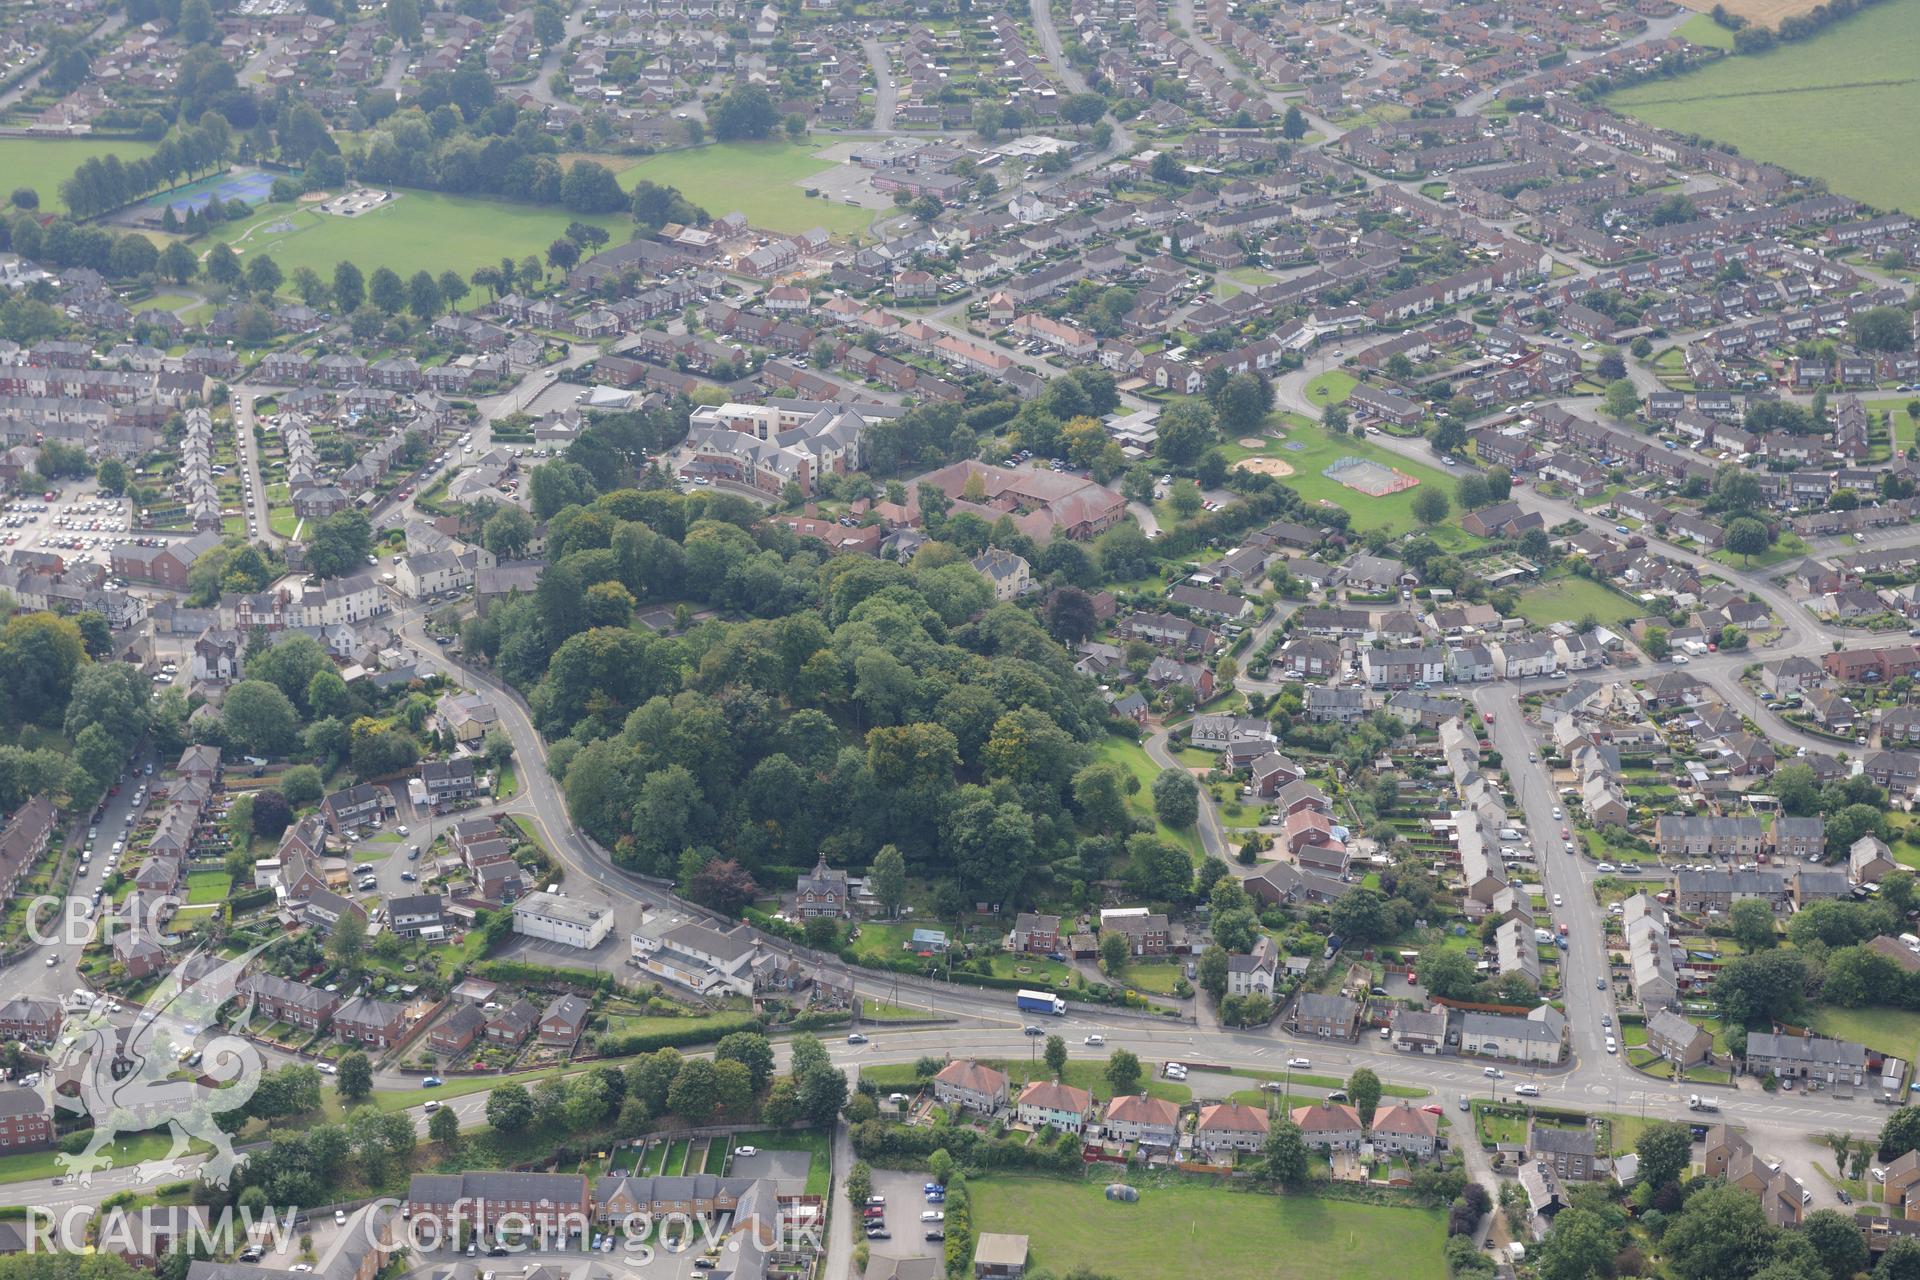 Mold castle and the surrounding town, Mold. Oblique aerial photograph taken during the Royal Commission's programme of archaeological aerial reconnaissance by Toby Driver on 11th September 2015.